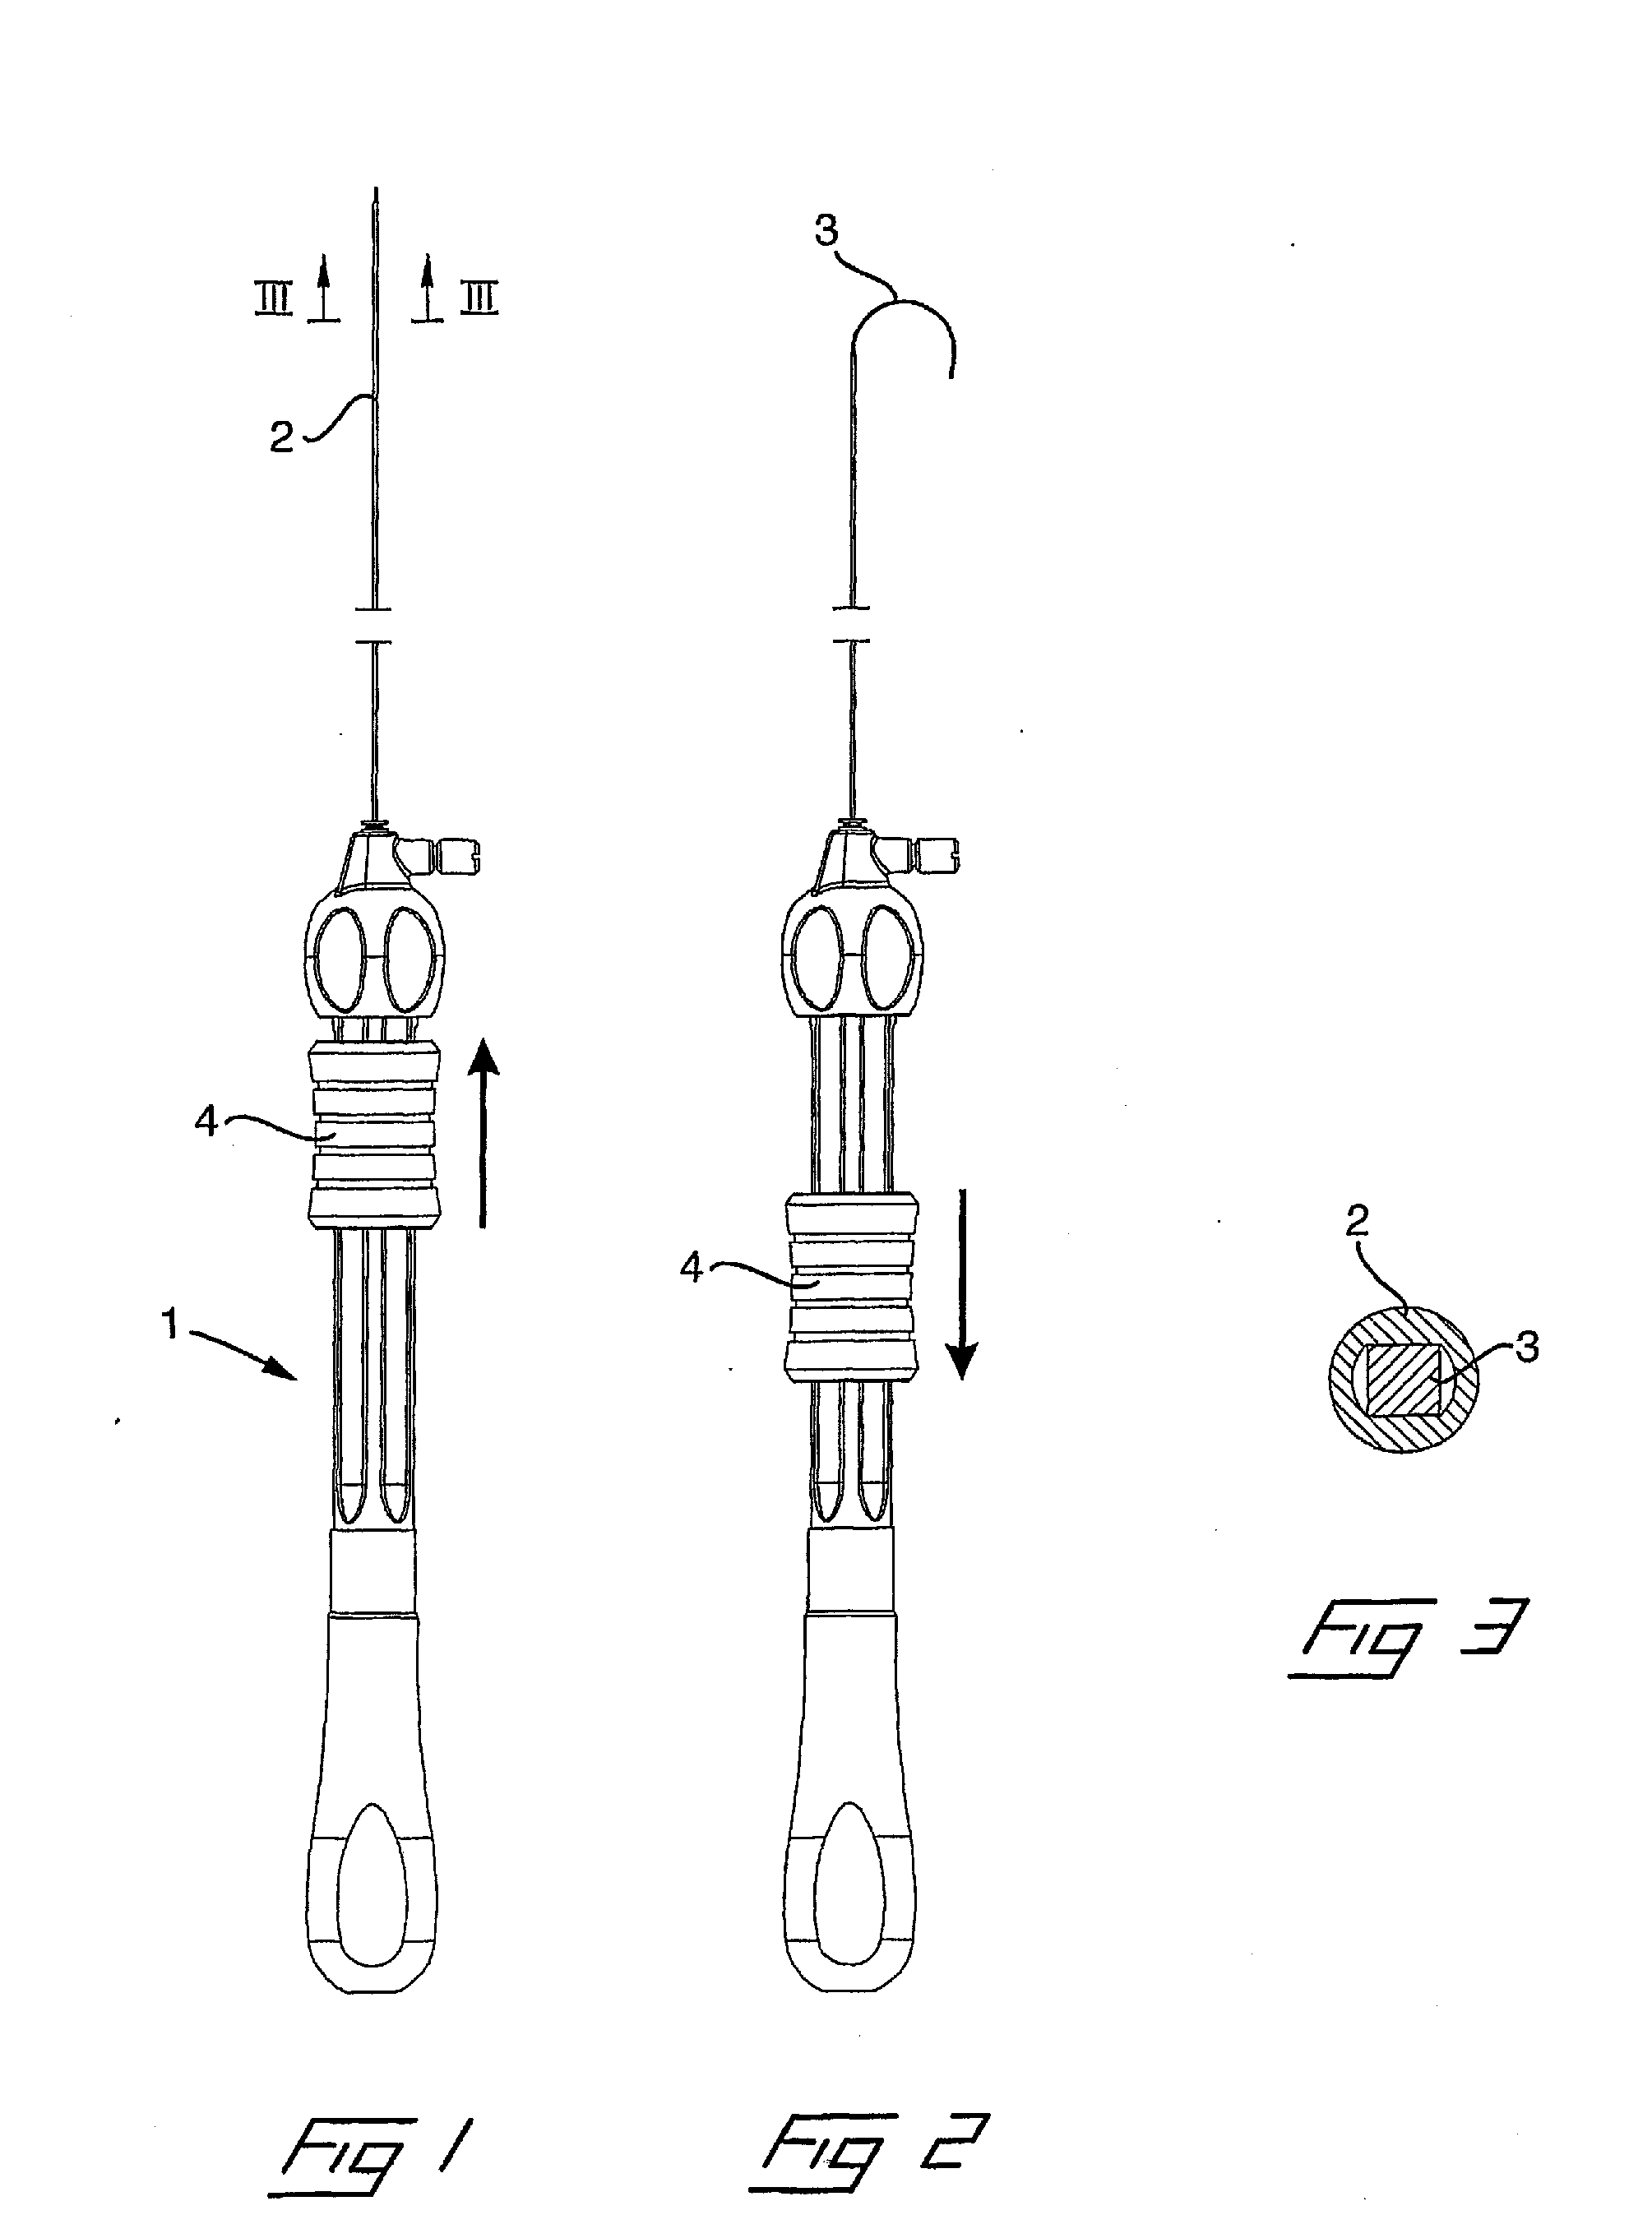 Steerable stylet for an implantable medical lead, and method for manufacture thereof